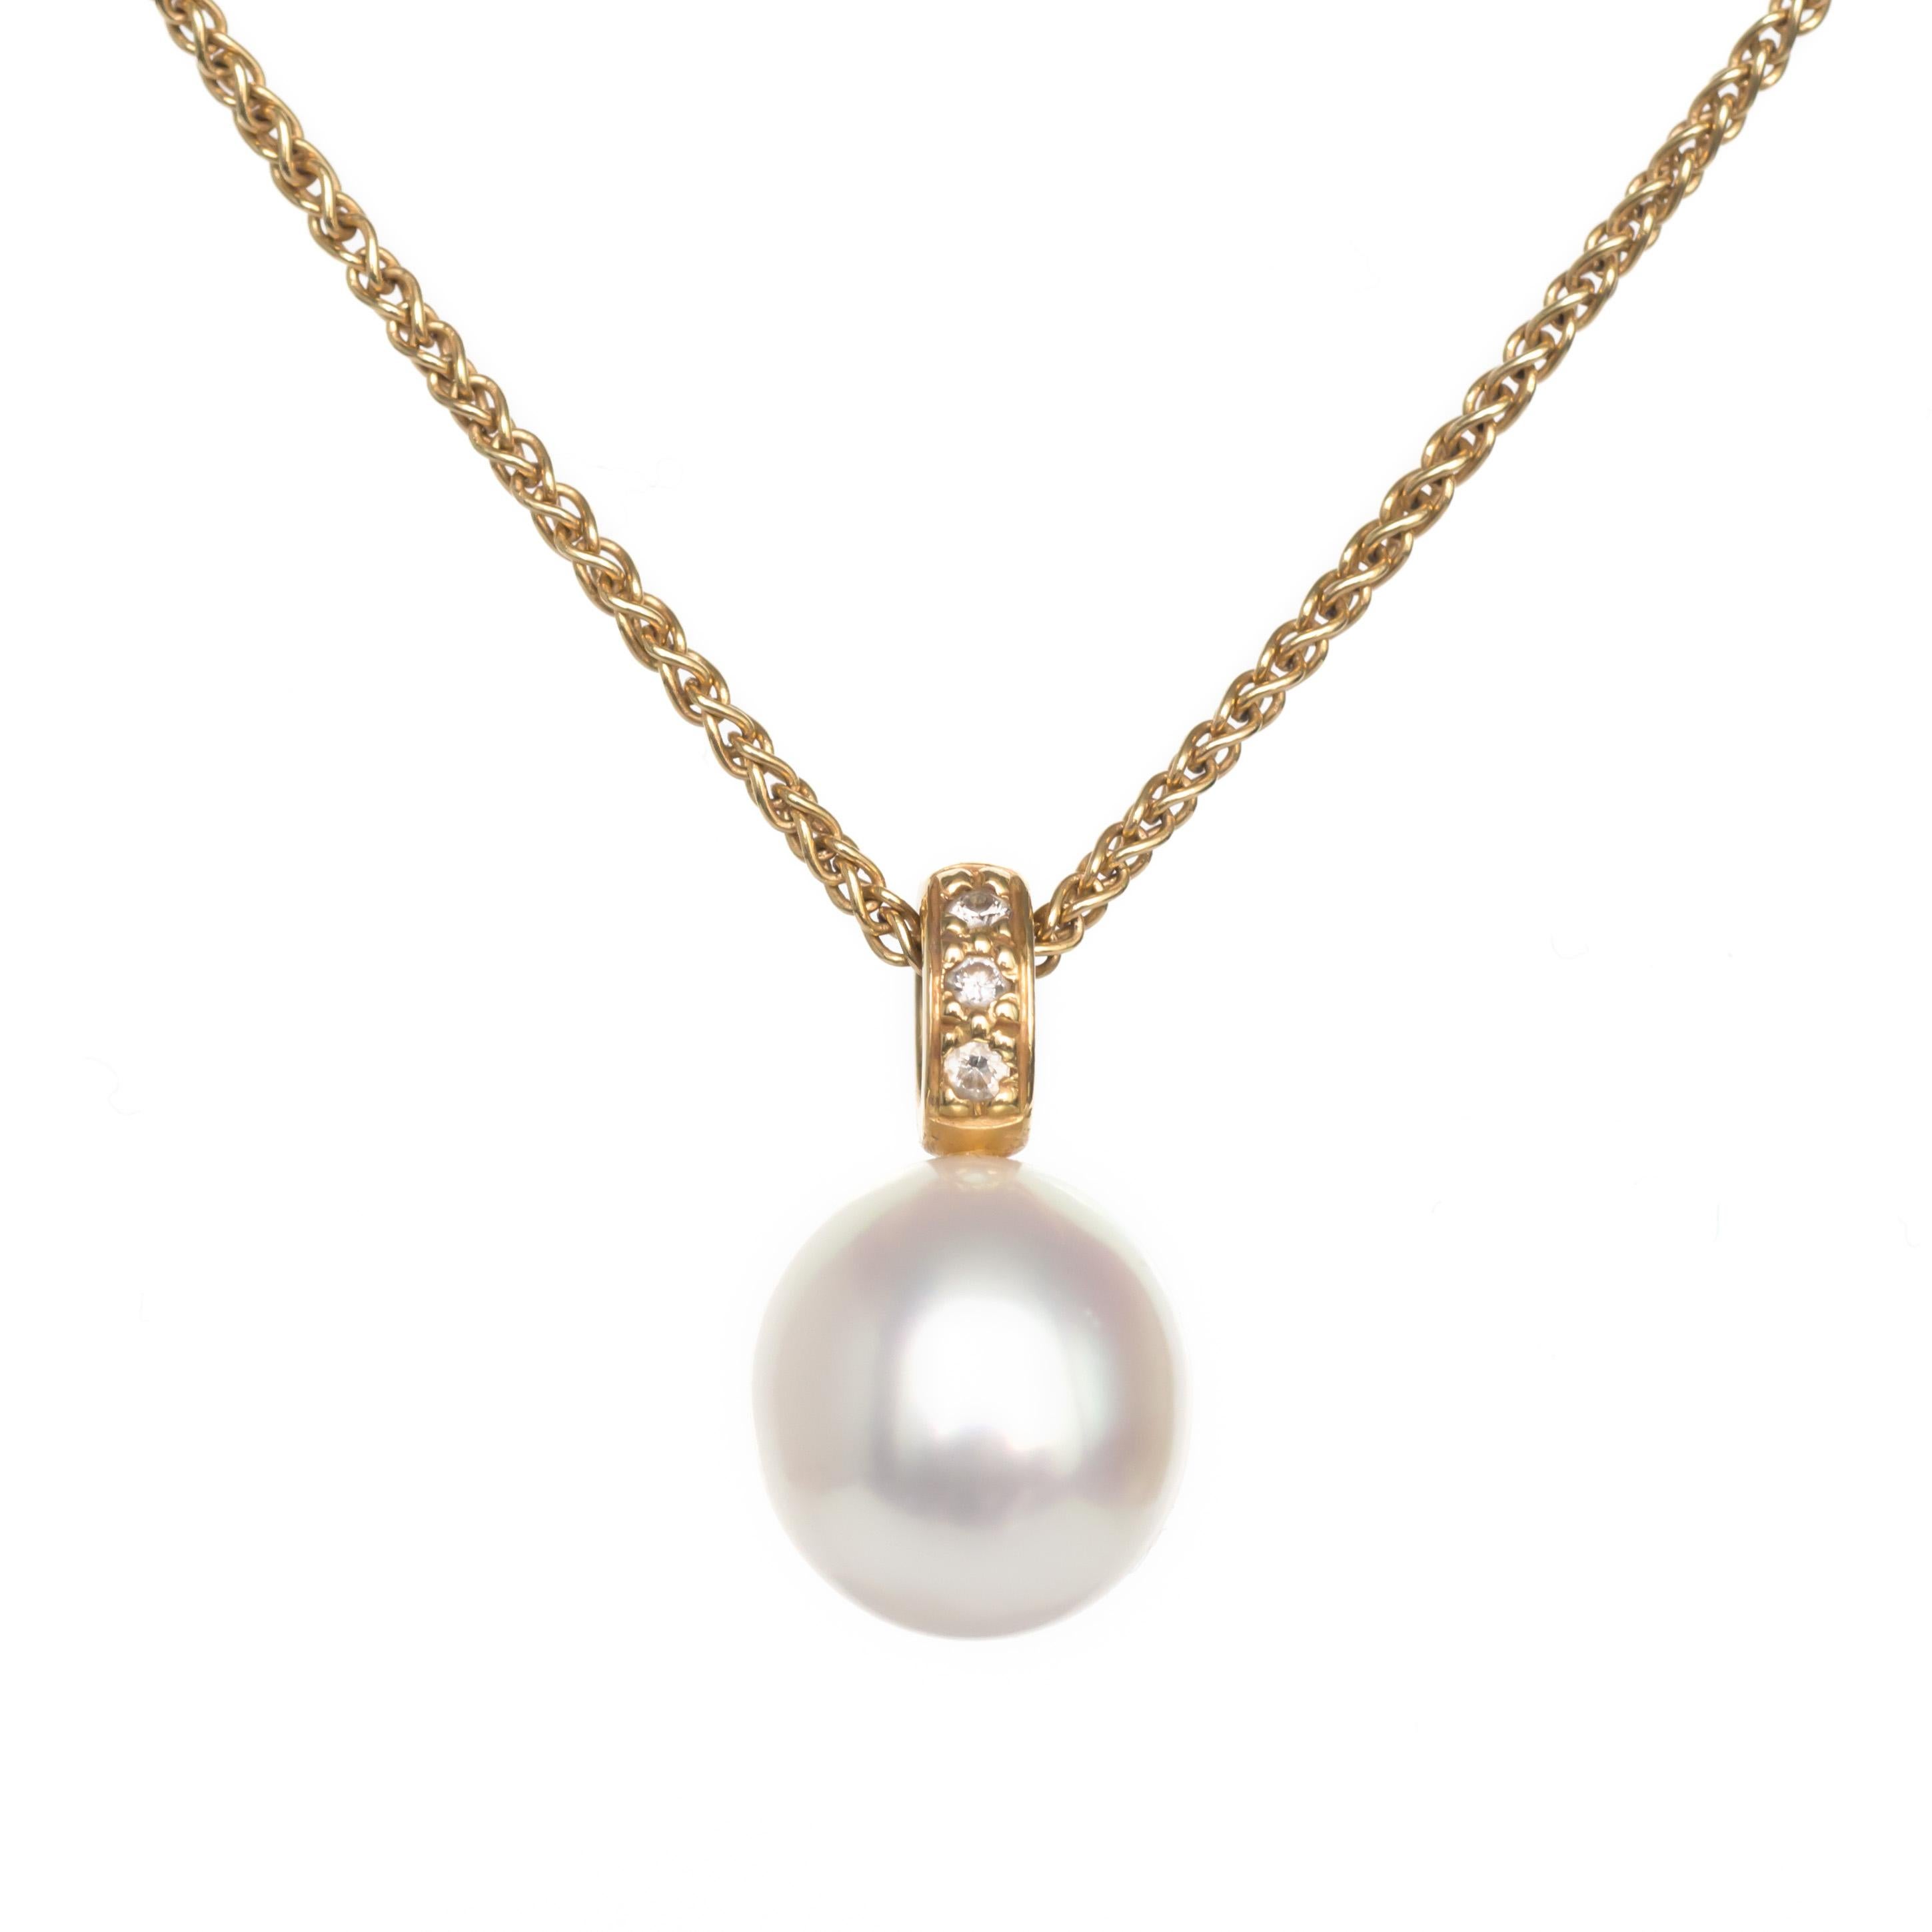 Item Details: 
Metal Type: 18 Karat Yellow Gold
Weight: 7.8 grams

Center Diamond Details:
Cultured Pearl.
AAA Quality.

Side Stone Details: 
Shape: Round Brilliant 
Total Carat Weight: .08 carat total weight
Color: F
Clarity: VS